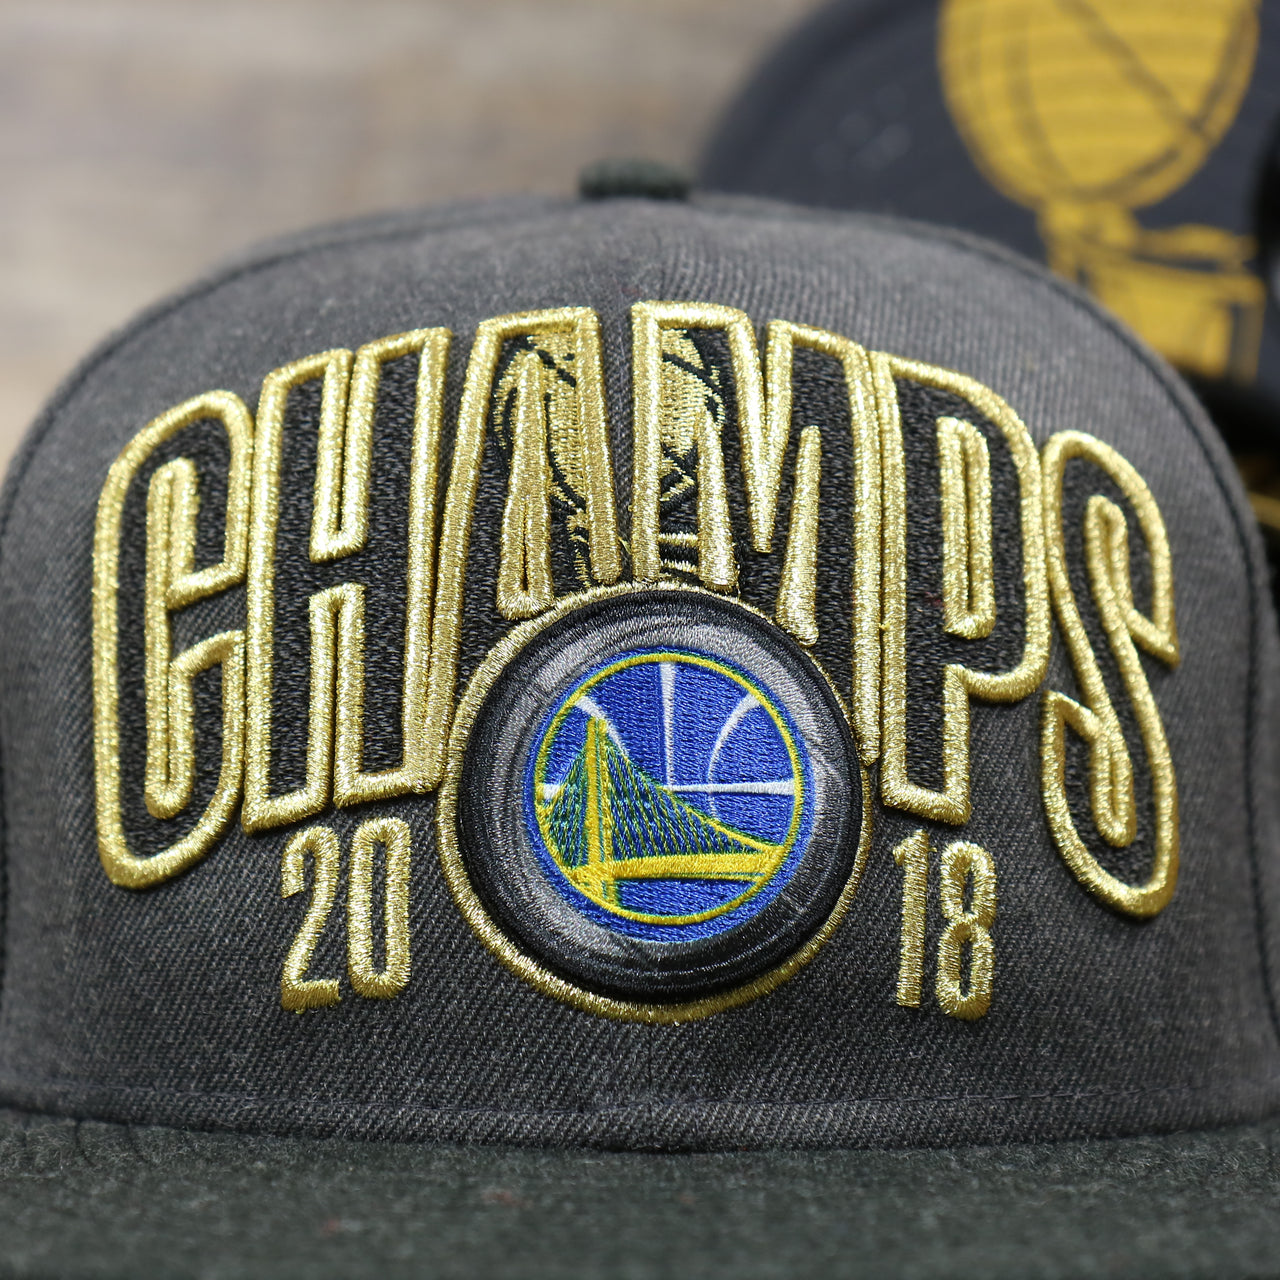 The Golden State Warriors and 2018 Champs Logo on the Golden State Warriors NBA Finals 2018 Champs Snapback Cap | Gray Snap Cap